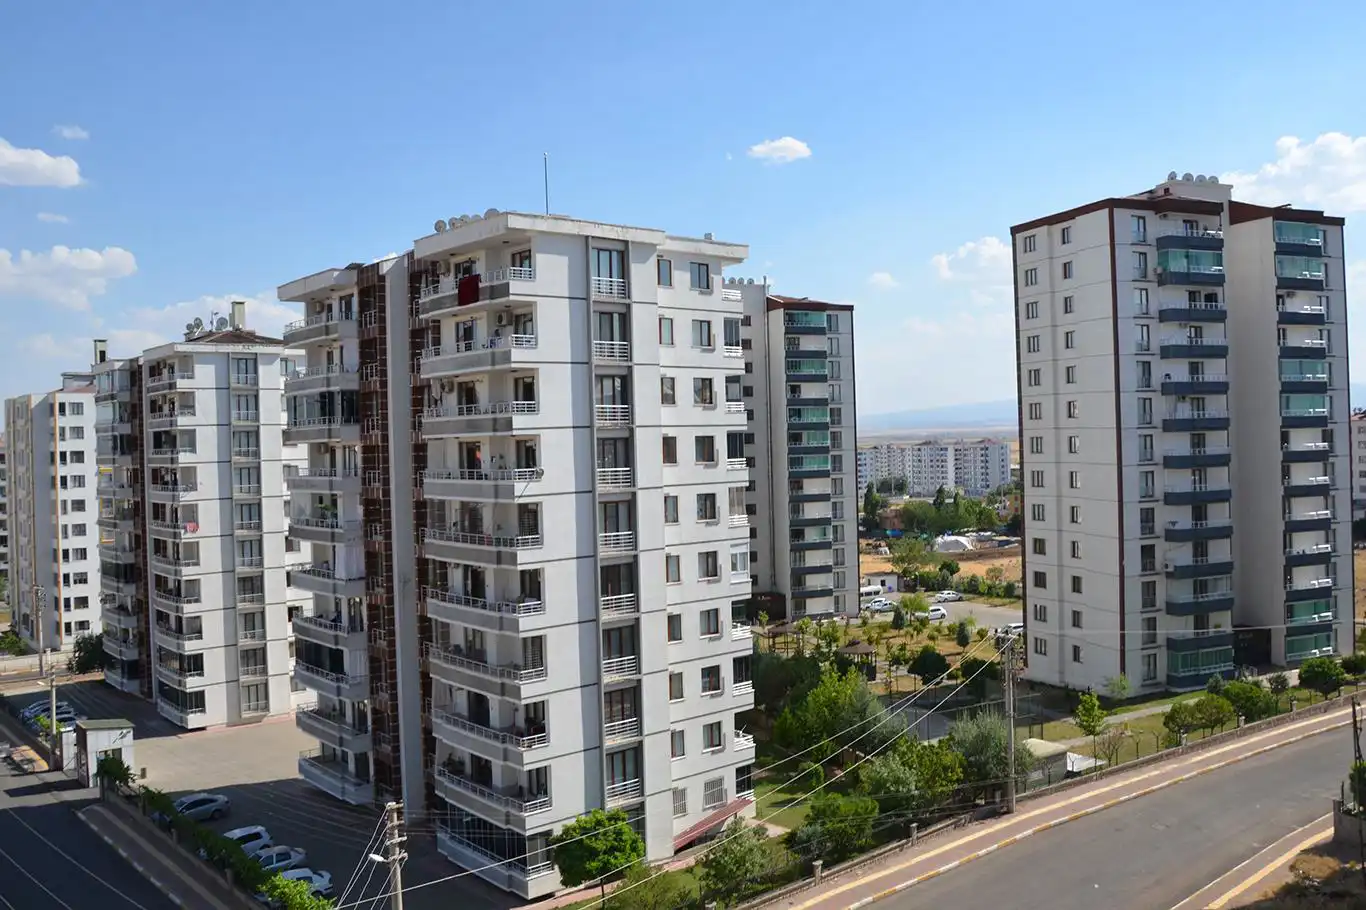 Turkish house sales see minor decrease in March